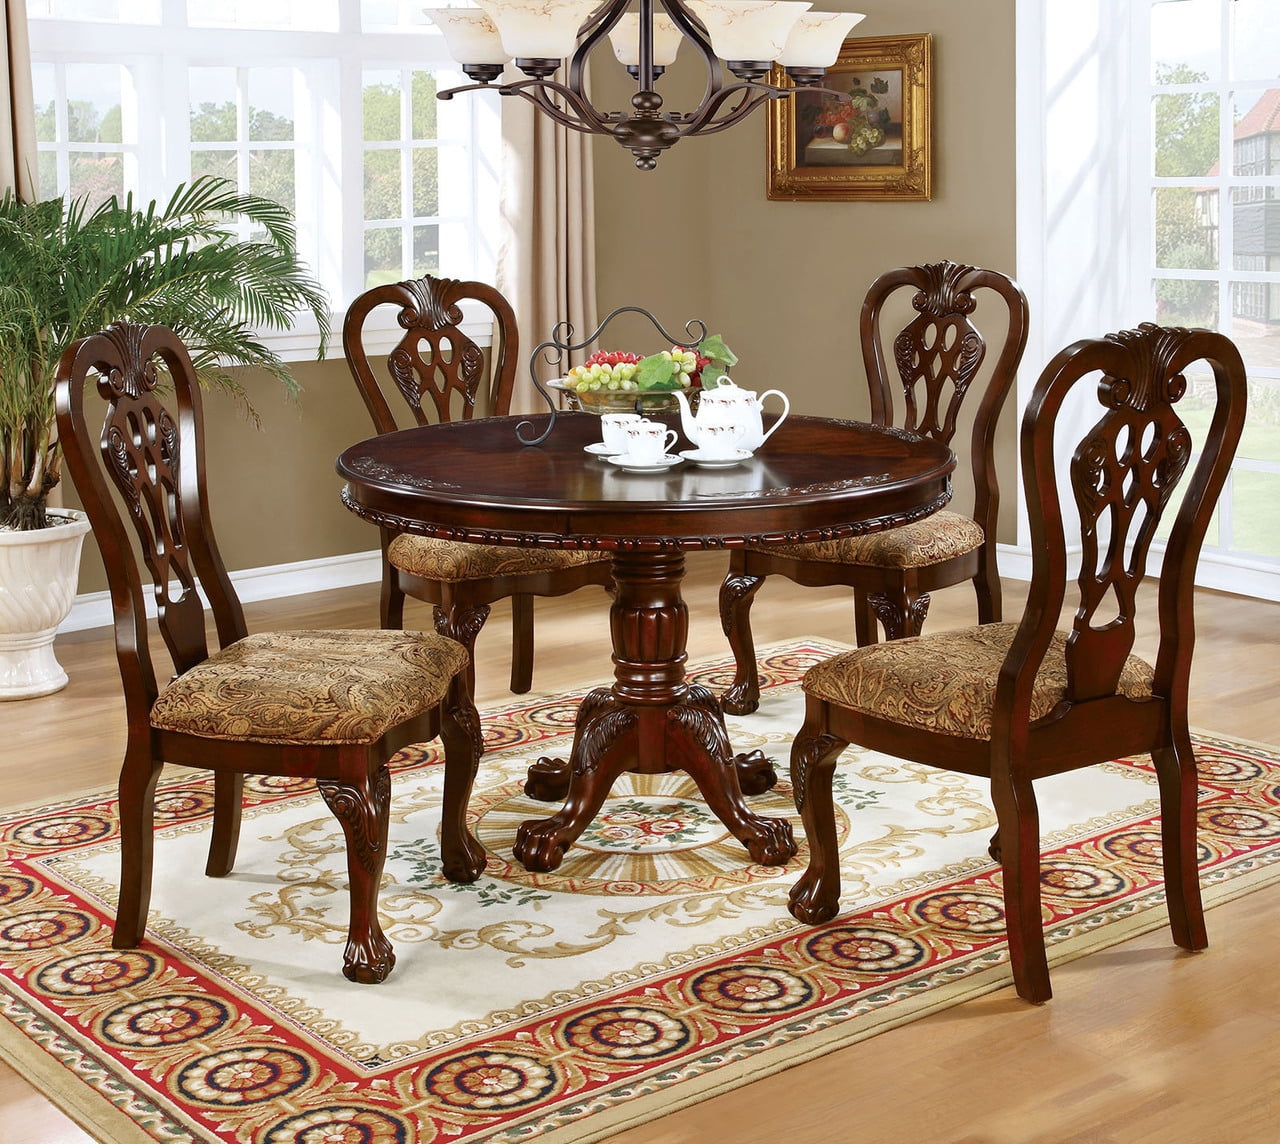  Dining Room Chair Set Info